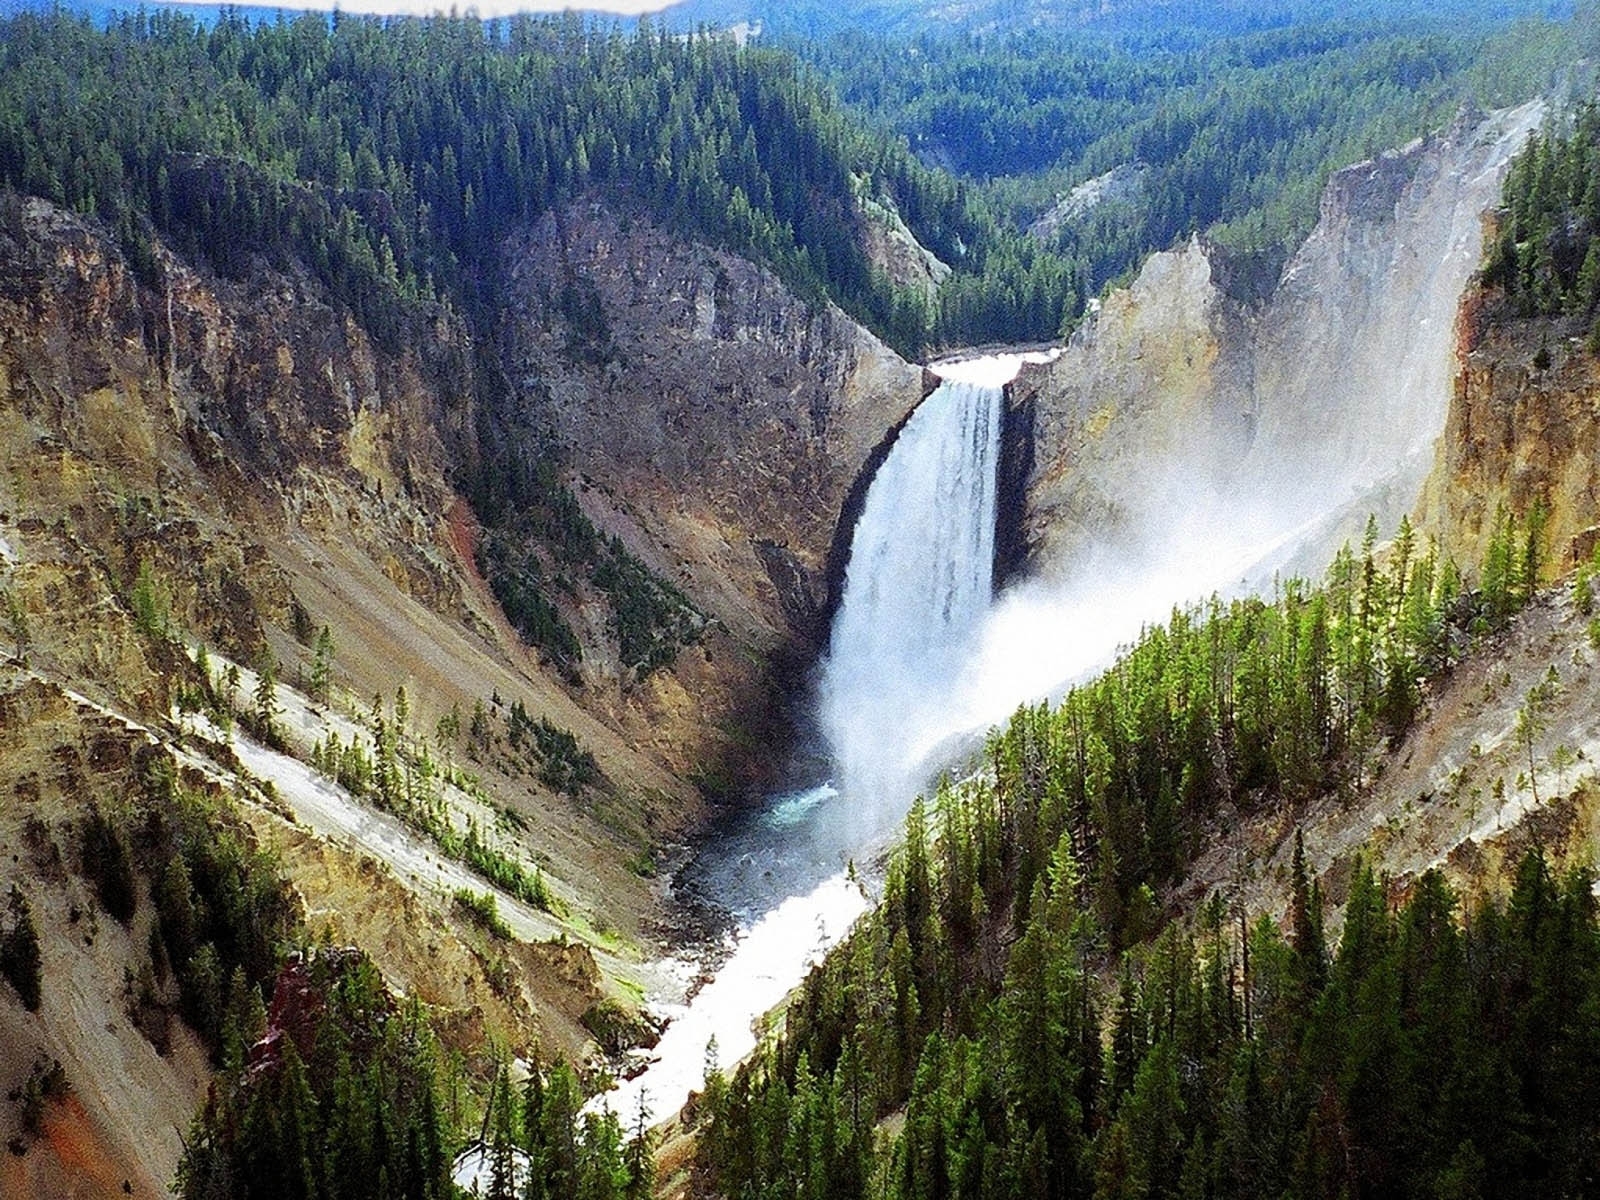 10 Best Yellowstone National Park Wallpaper Hd FULL HD 1080p For PC